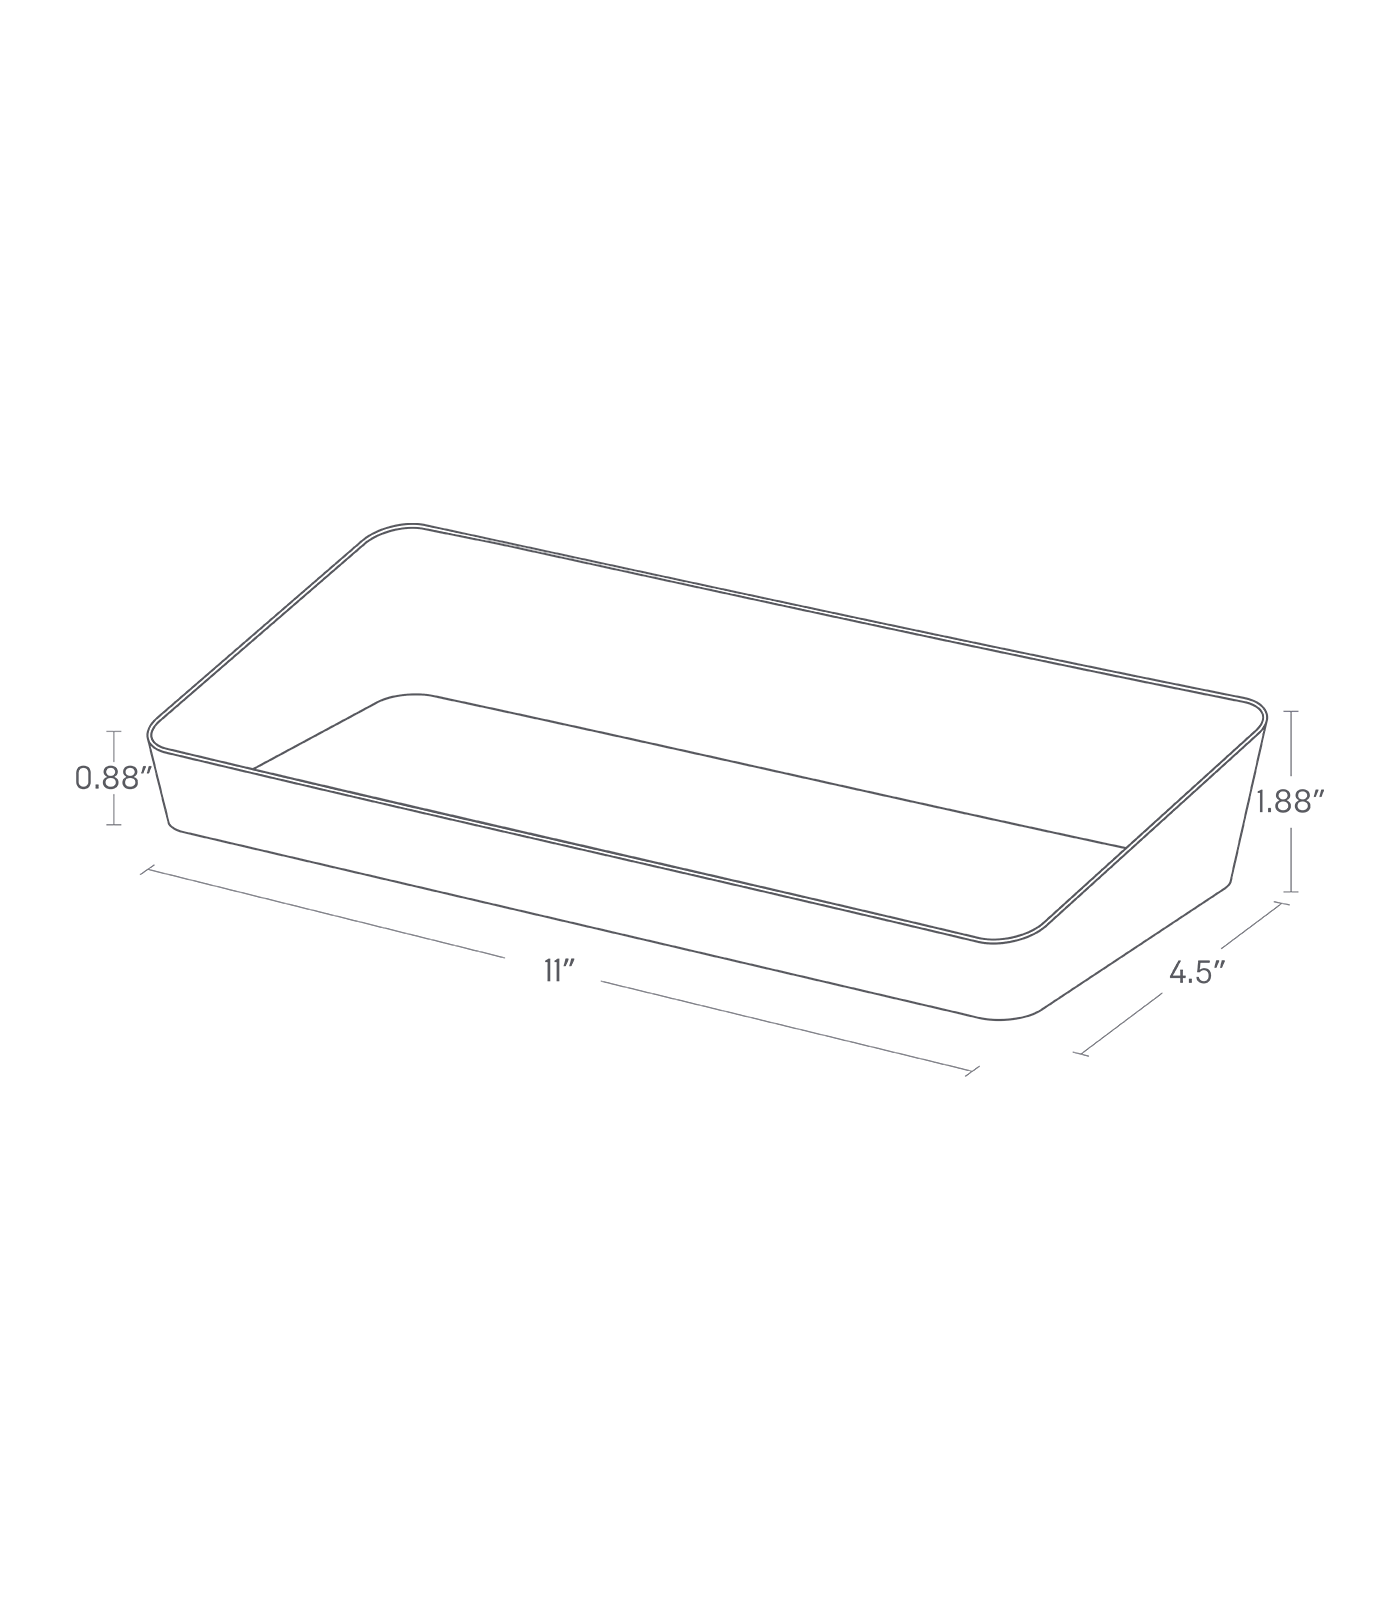 Dimension image for Vanity Tray showing length of 11